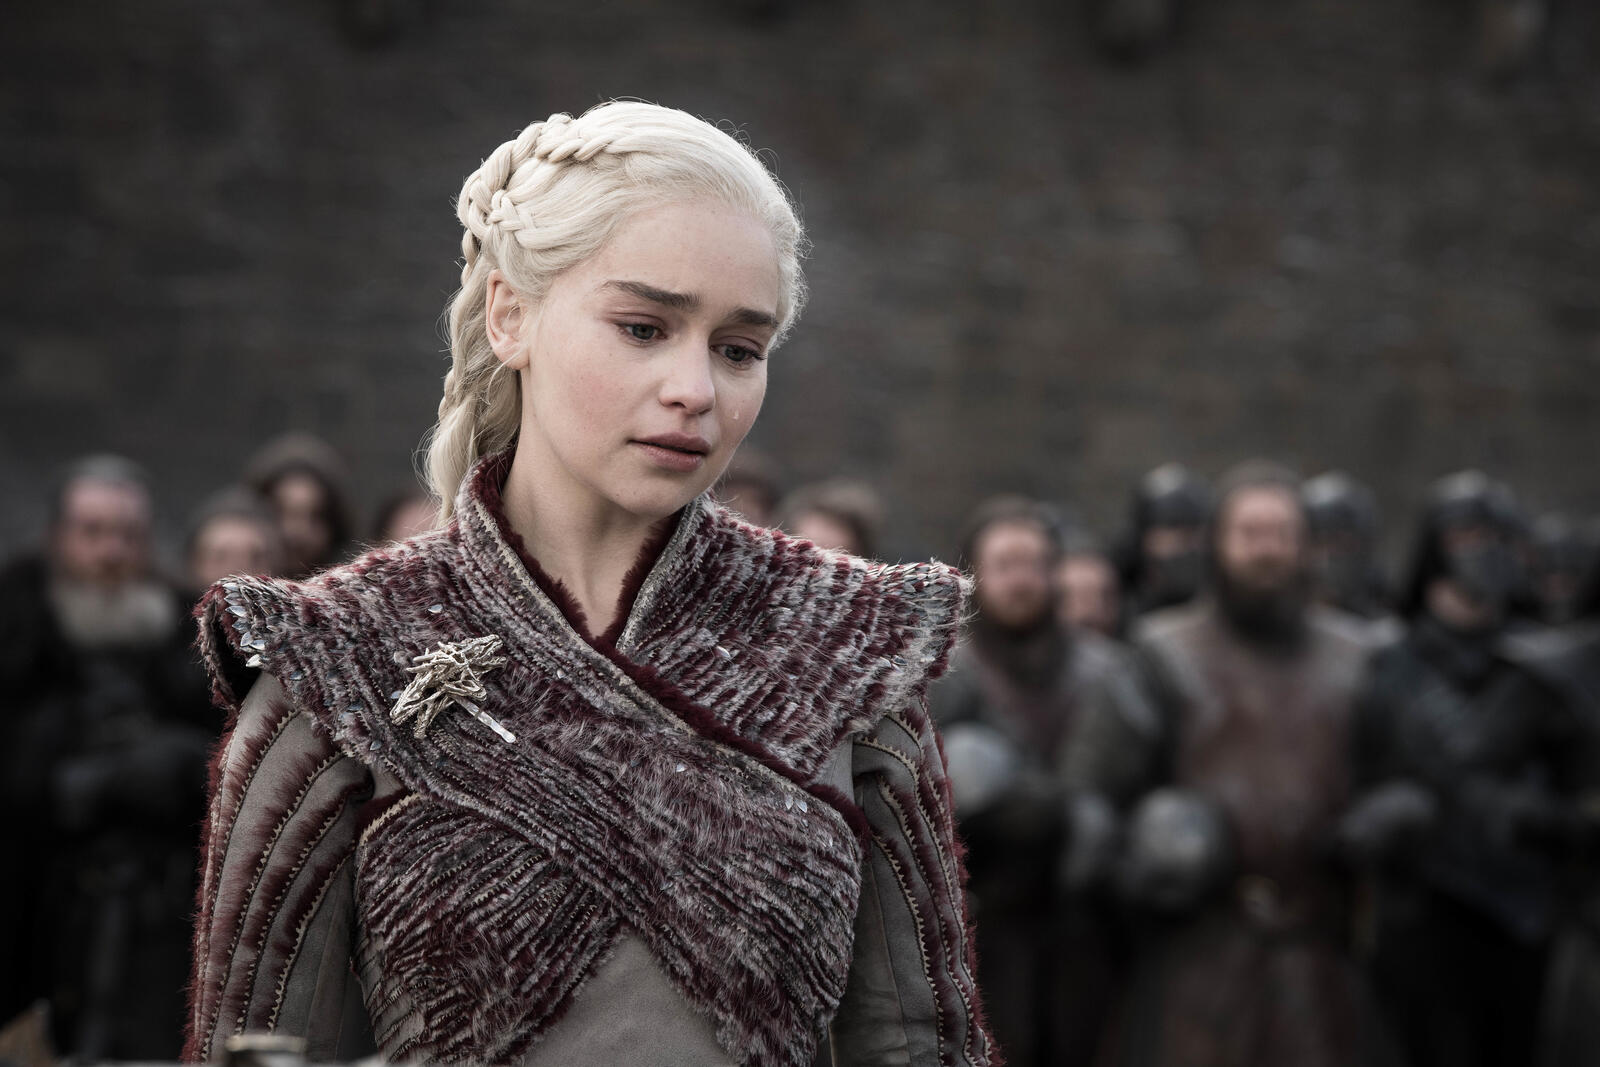 Free photo The Blonde Girl in Game of Thrones Season 8